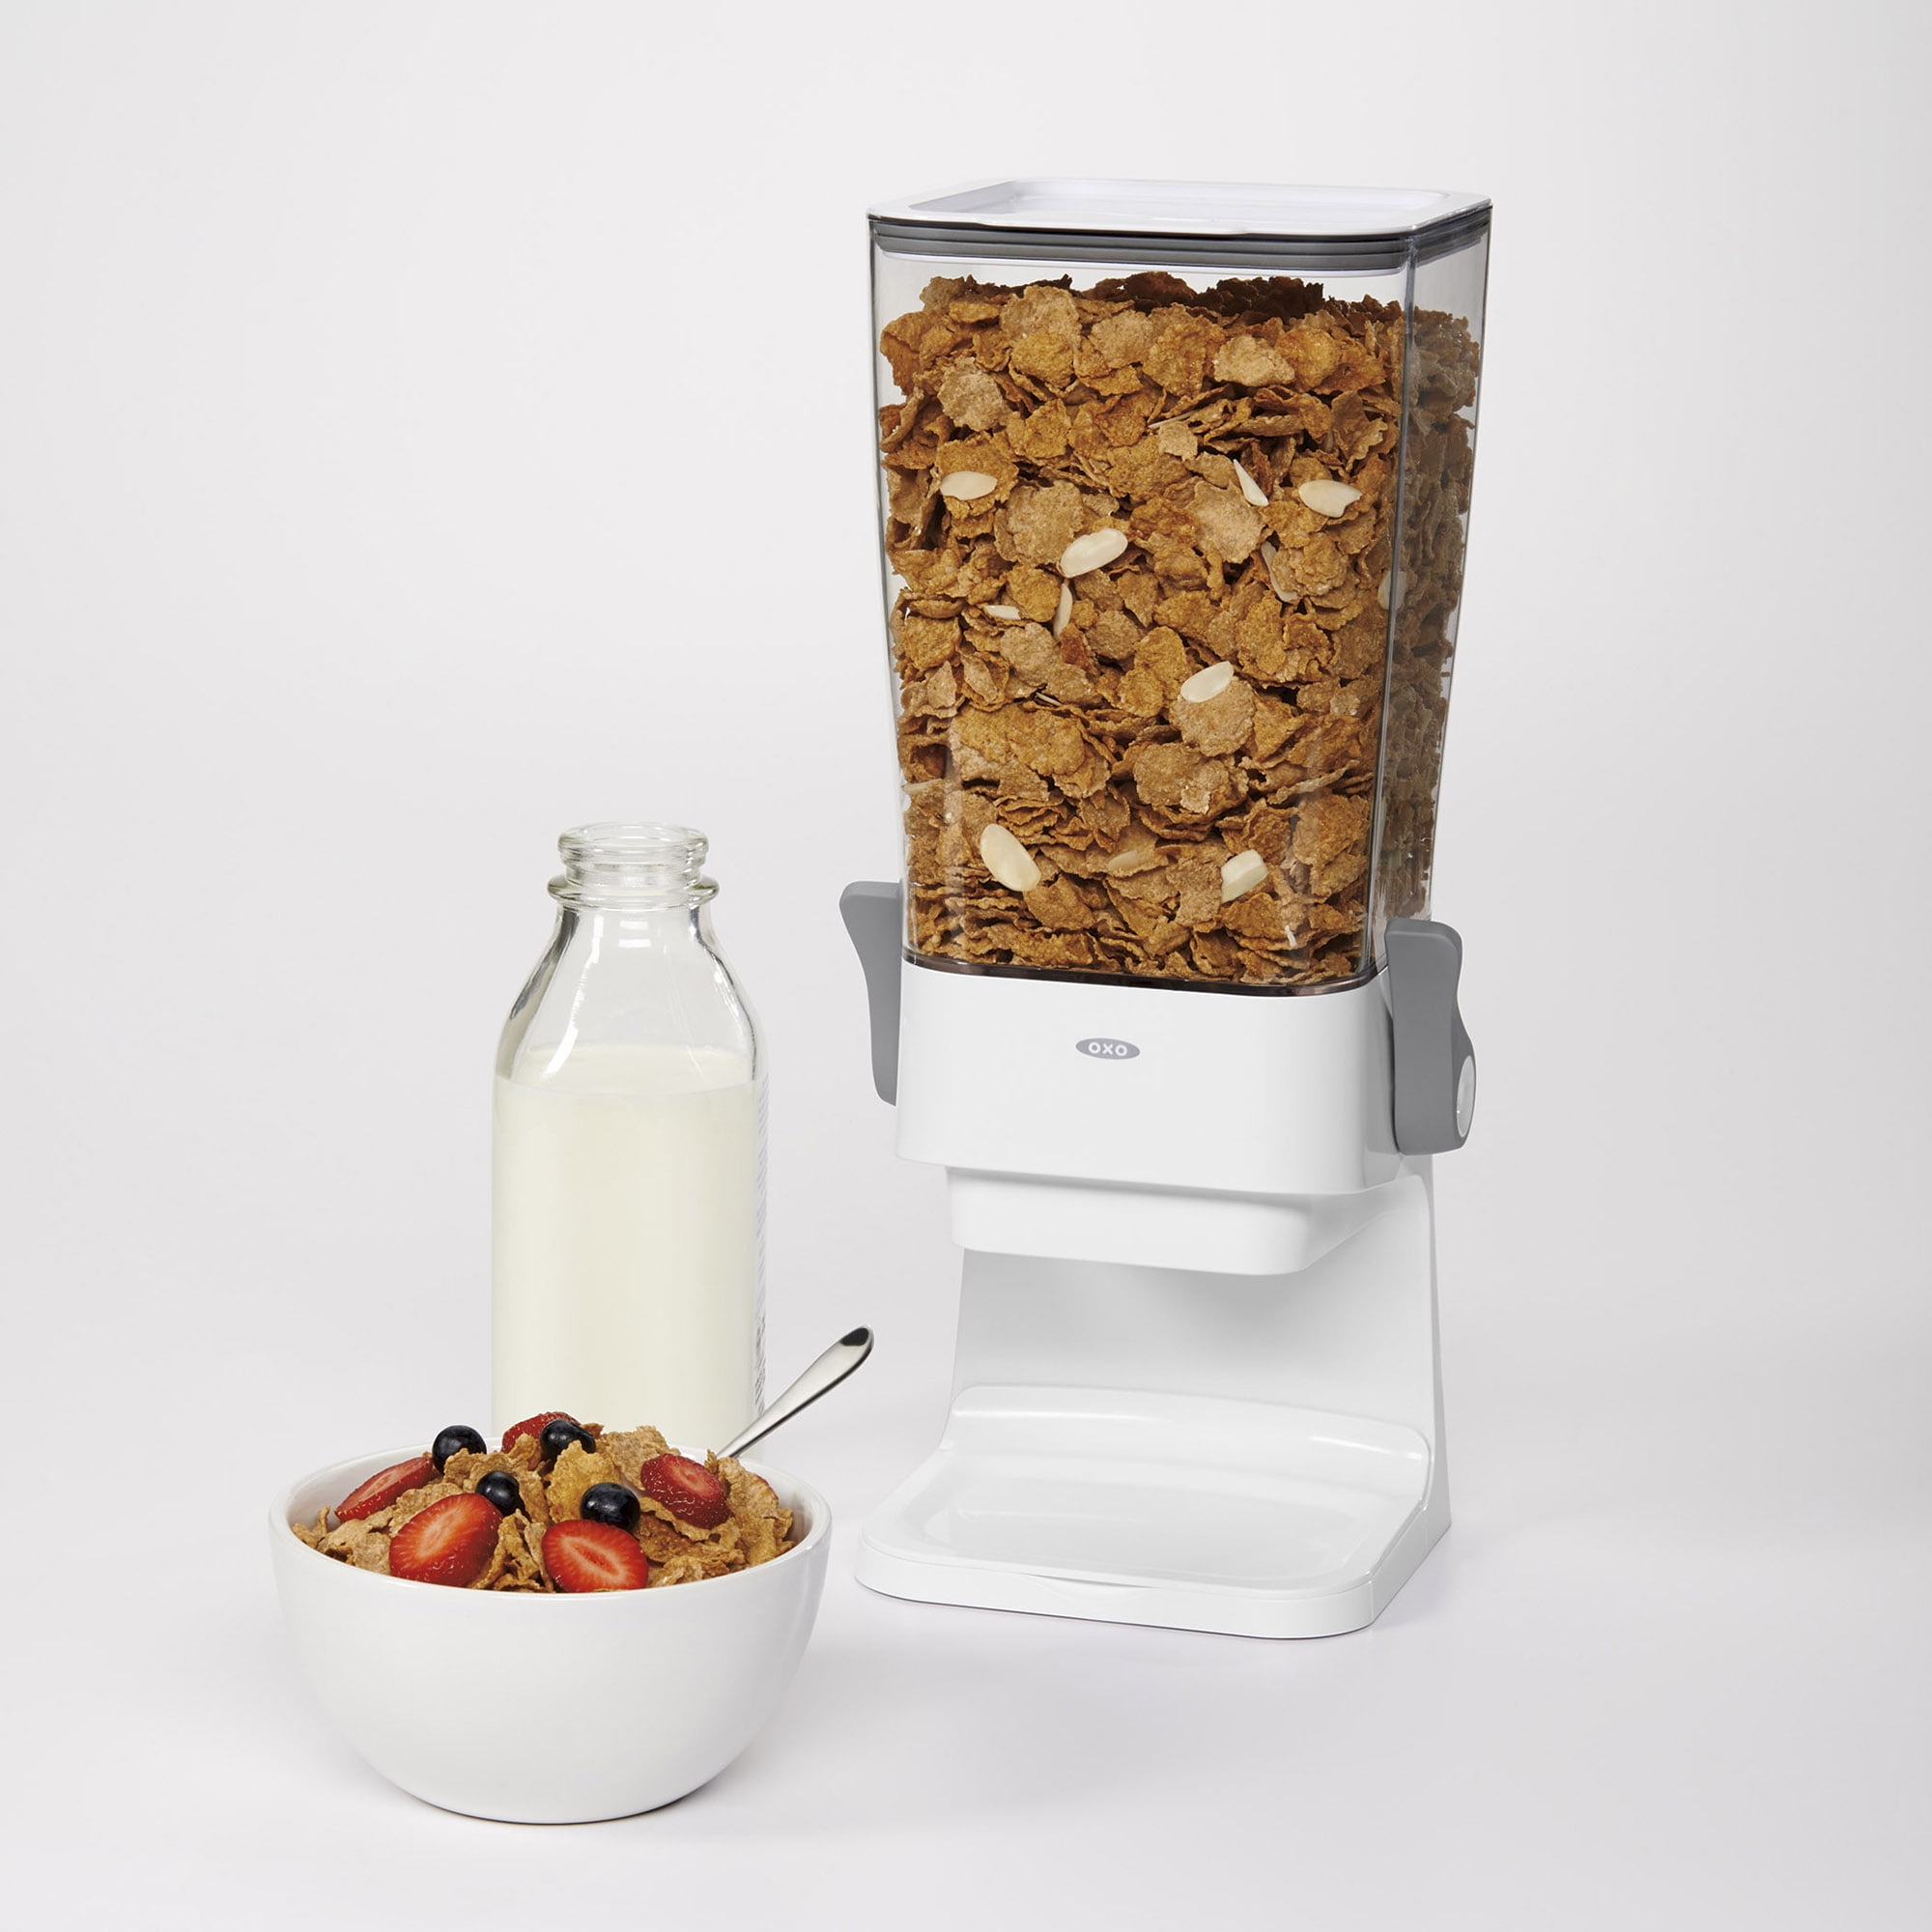 POWERLIX 2pc Cereal Dispenser Countertop (5.5 L), Cereal Storage